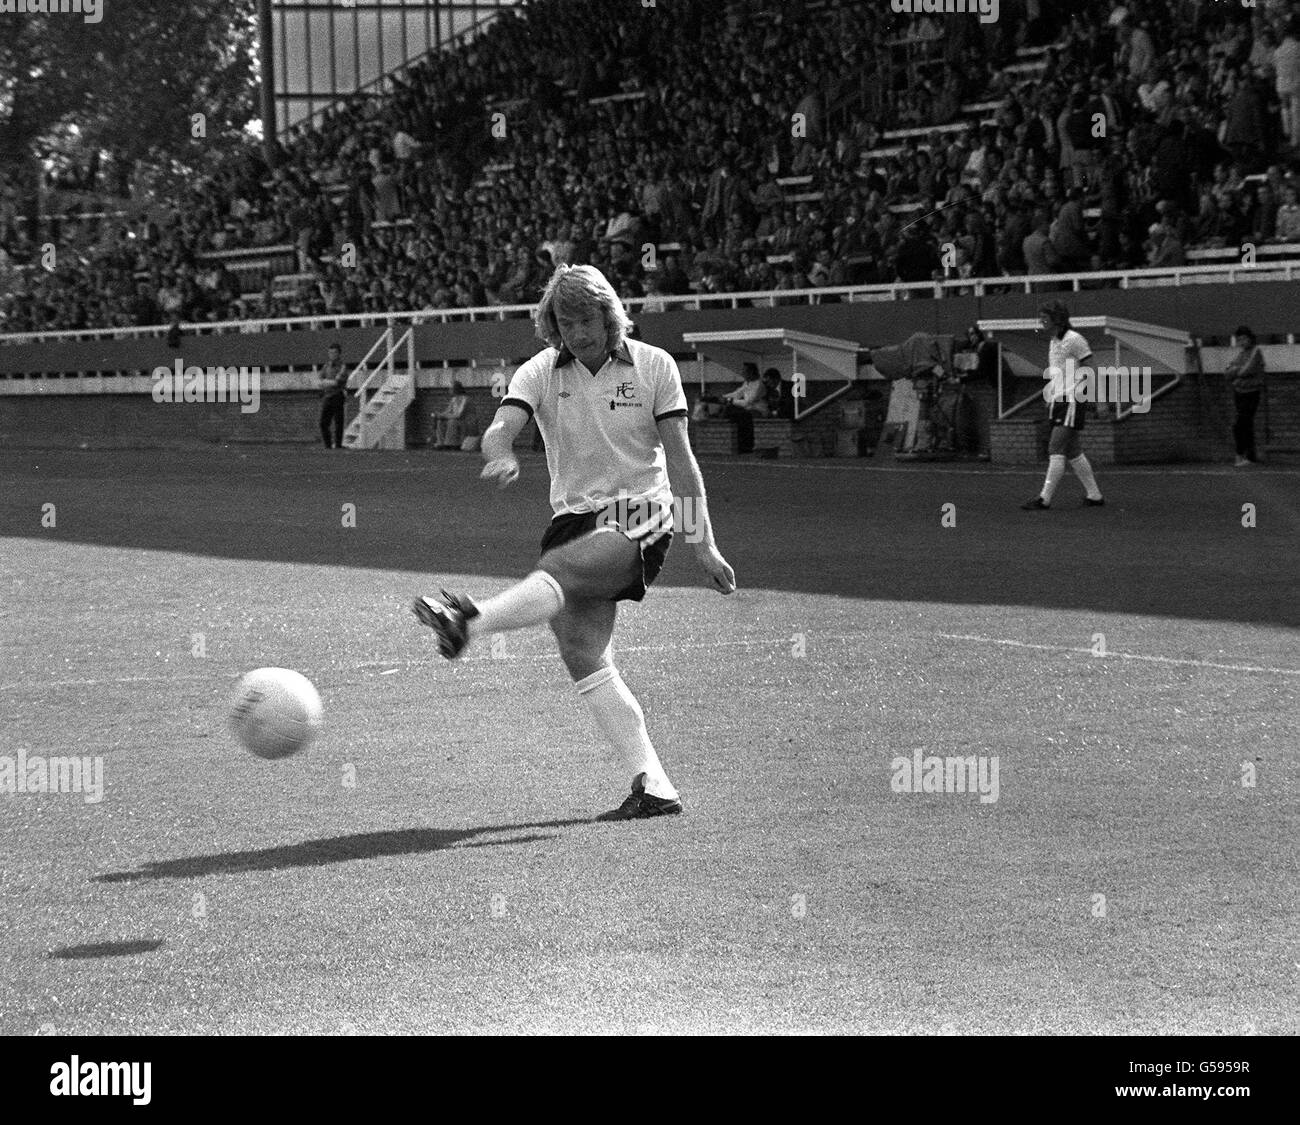 Rodney Marsh, who began his career at Fulham 13 years ago, is back at Craven Cottage in action for the Second Division Club. Stock Photo